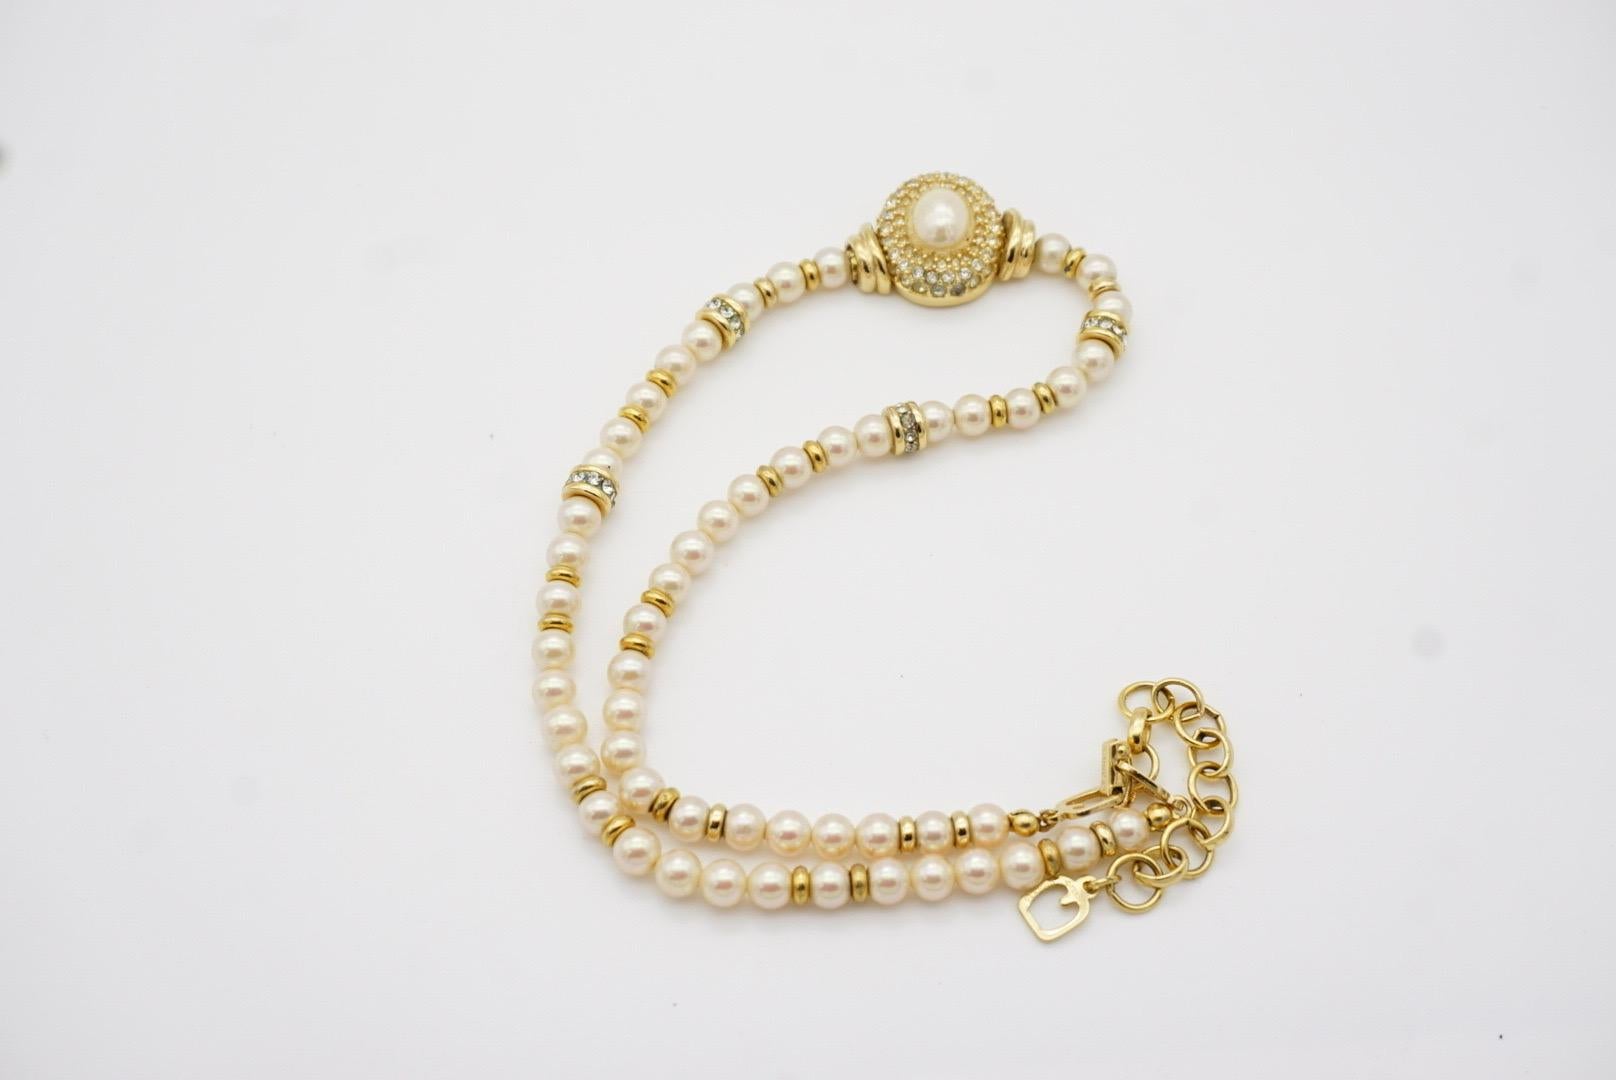 Christian Dior GROSSE 1960s White Oval Crystals Pendant Beaded Pearls Necklace For Sale 12